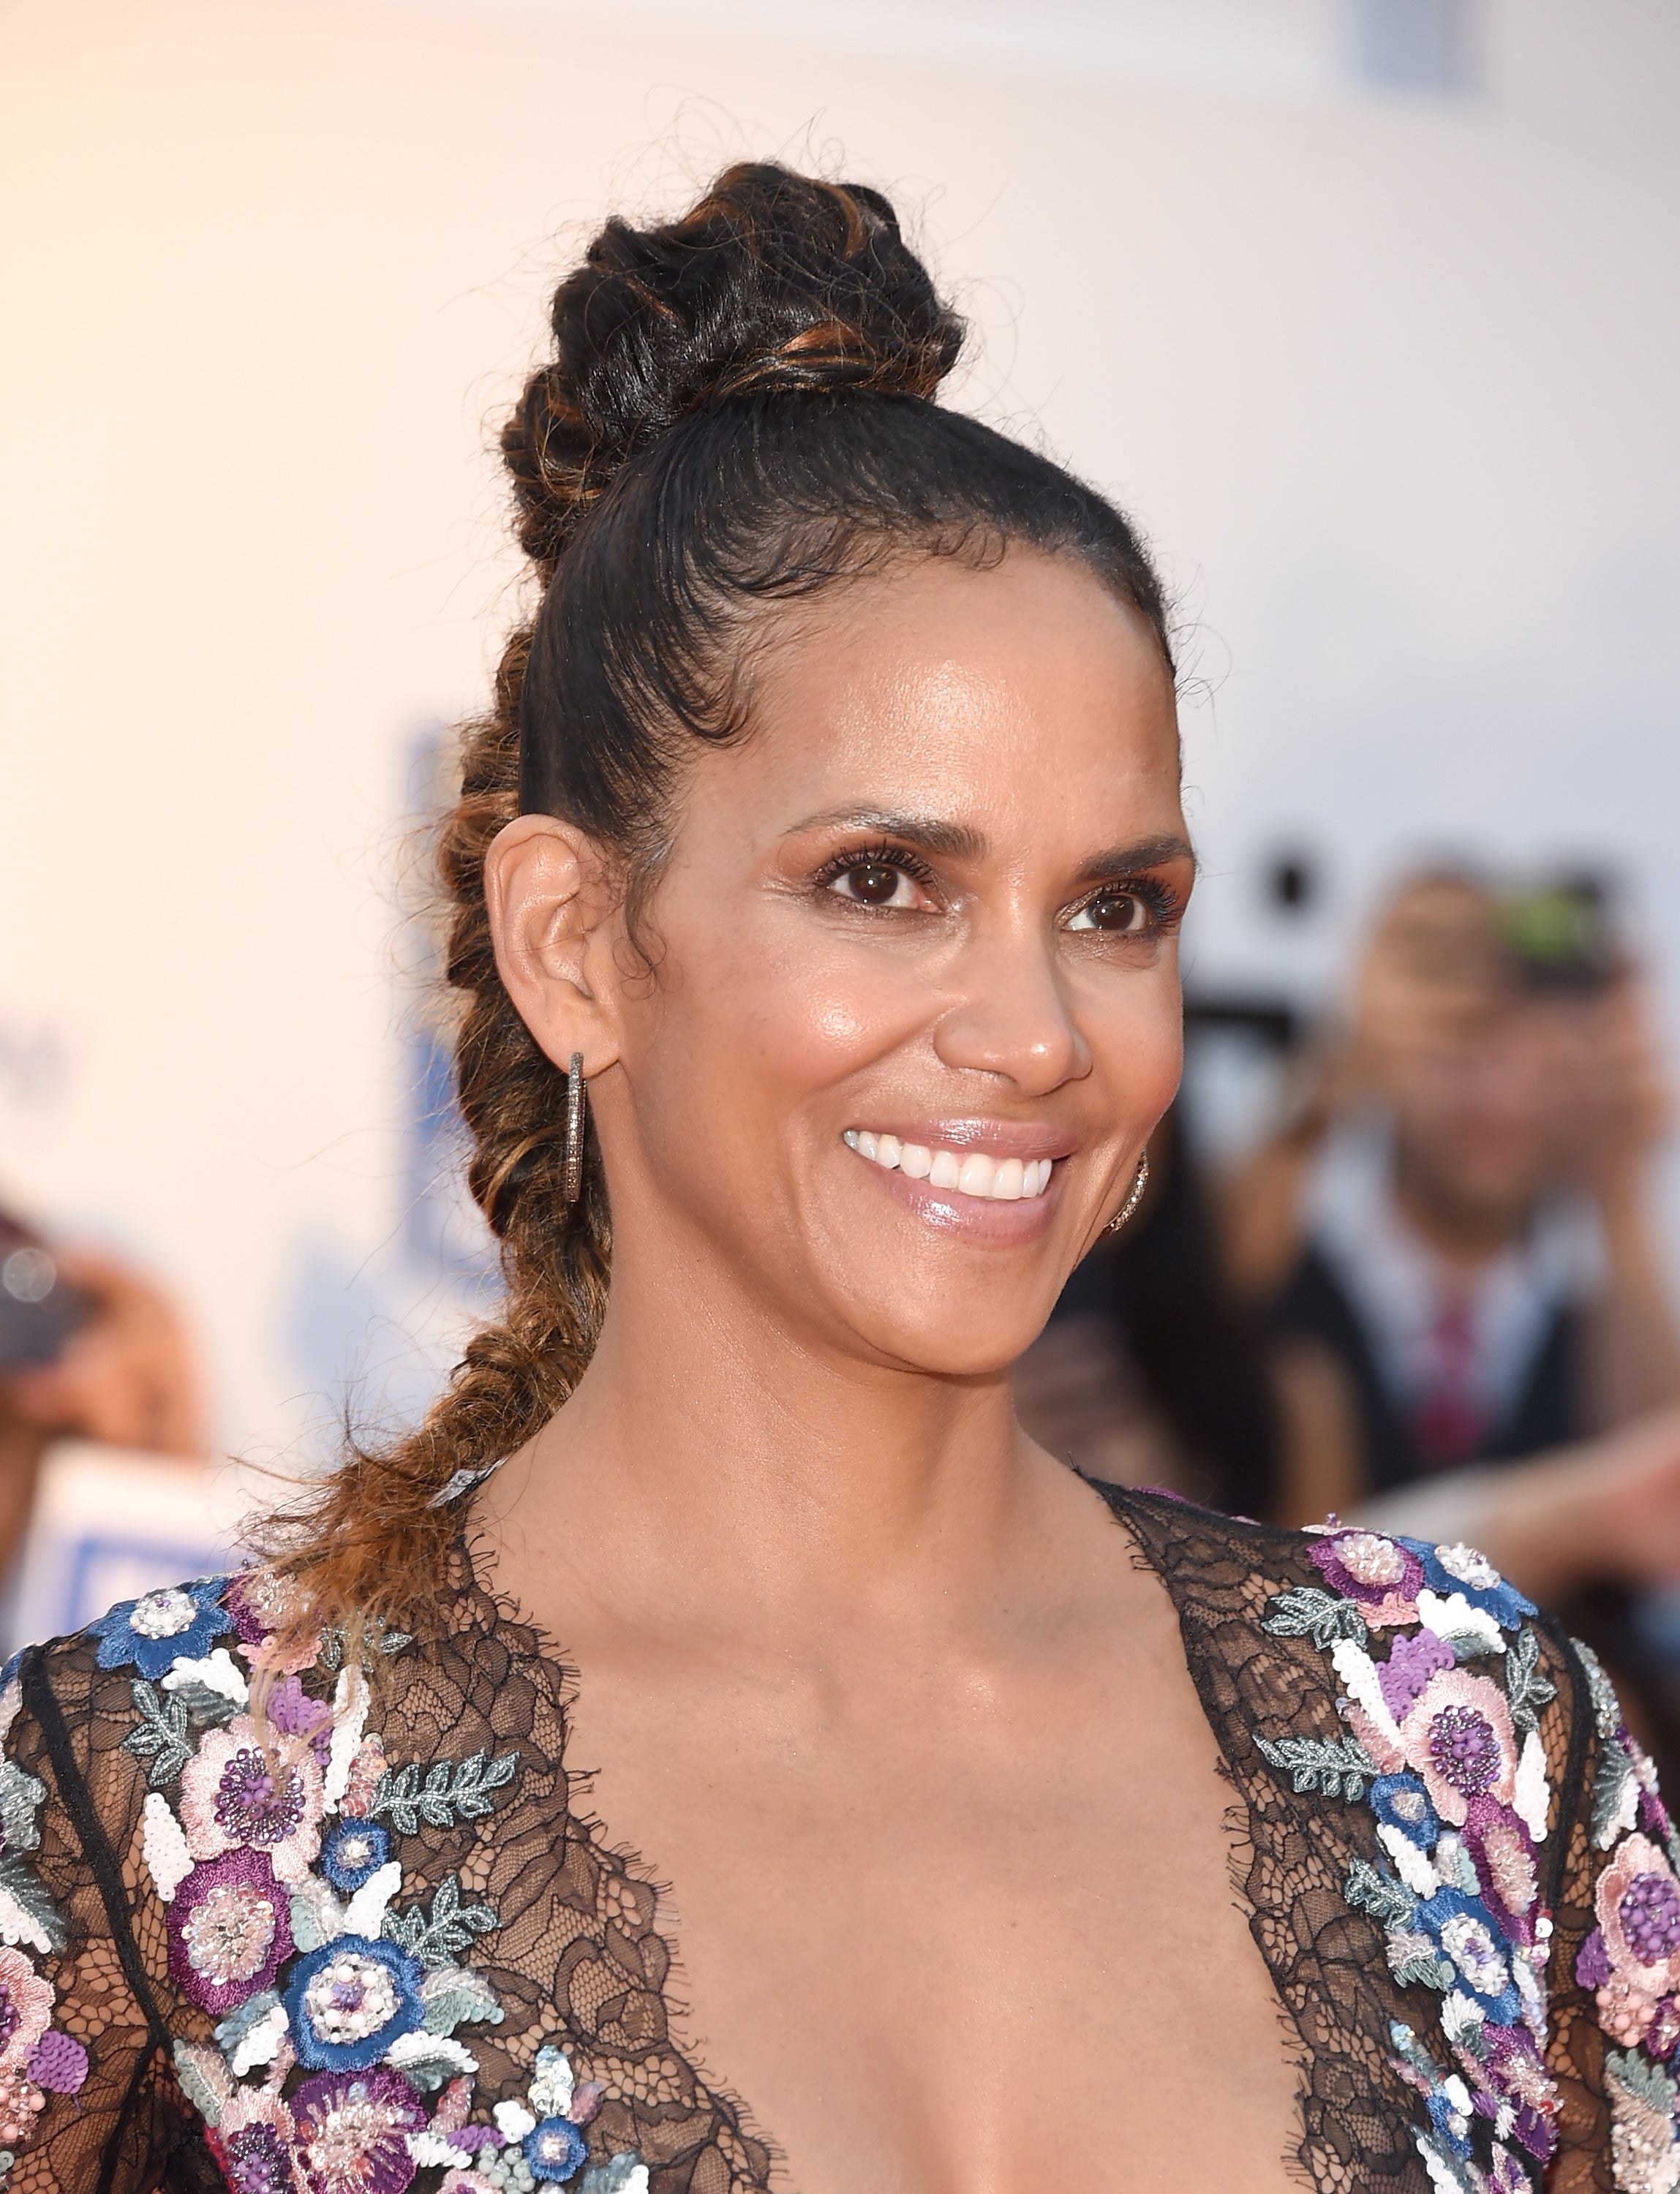 You Need A 360 View of Halle Berry's Latest Hairstyle
